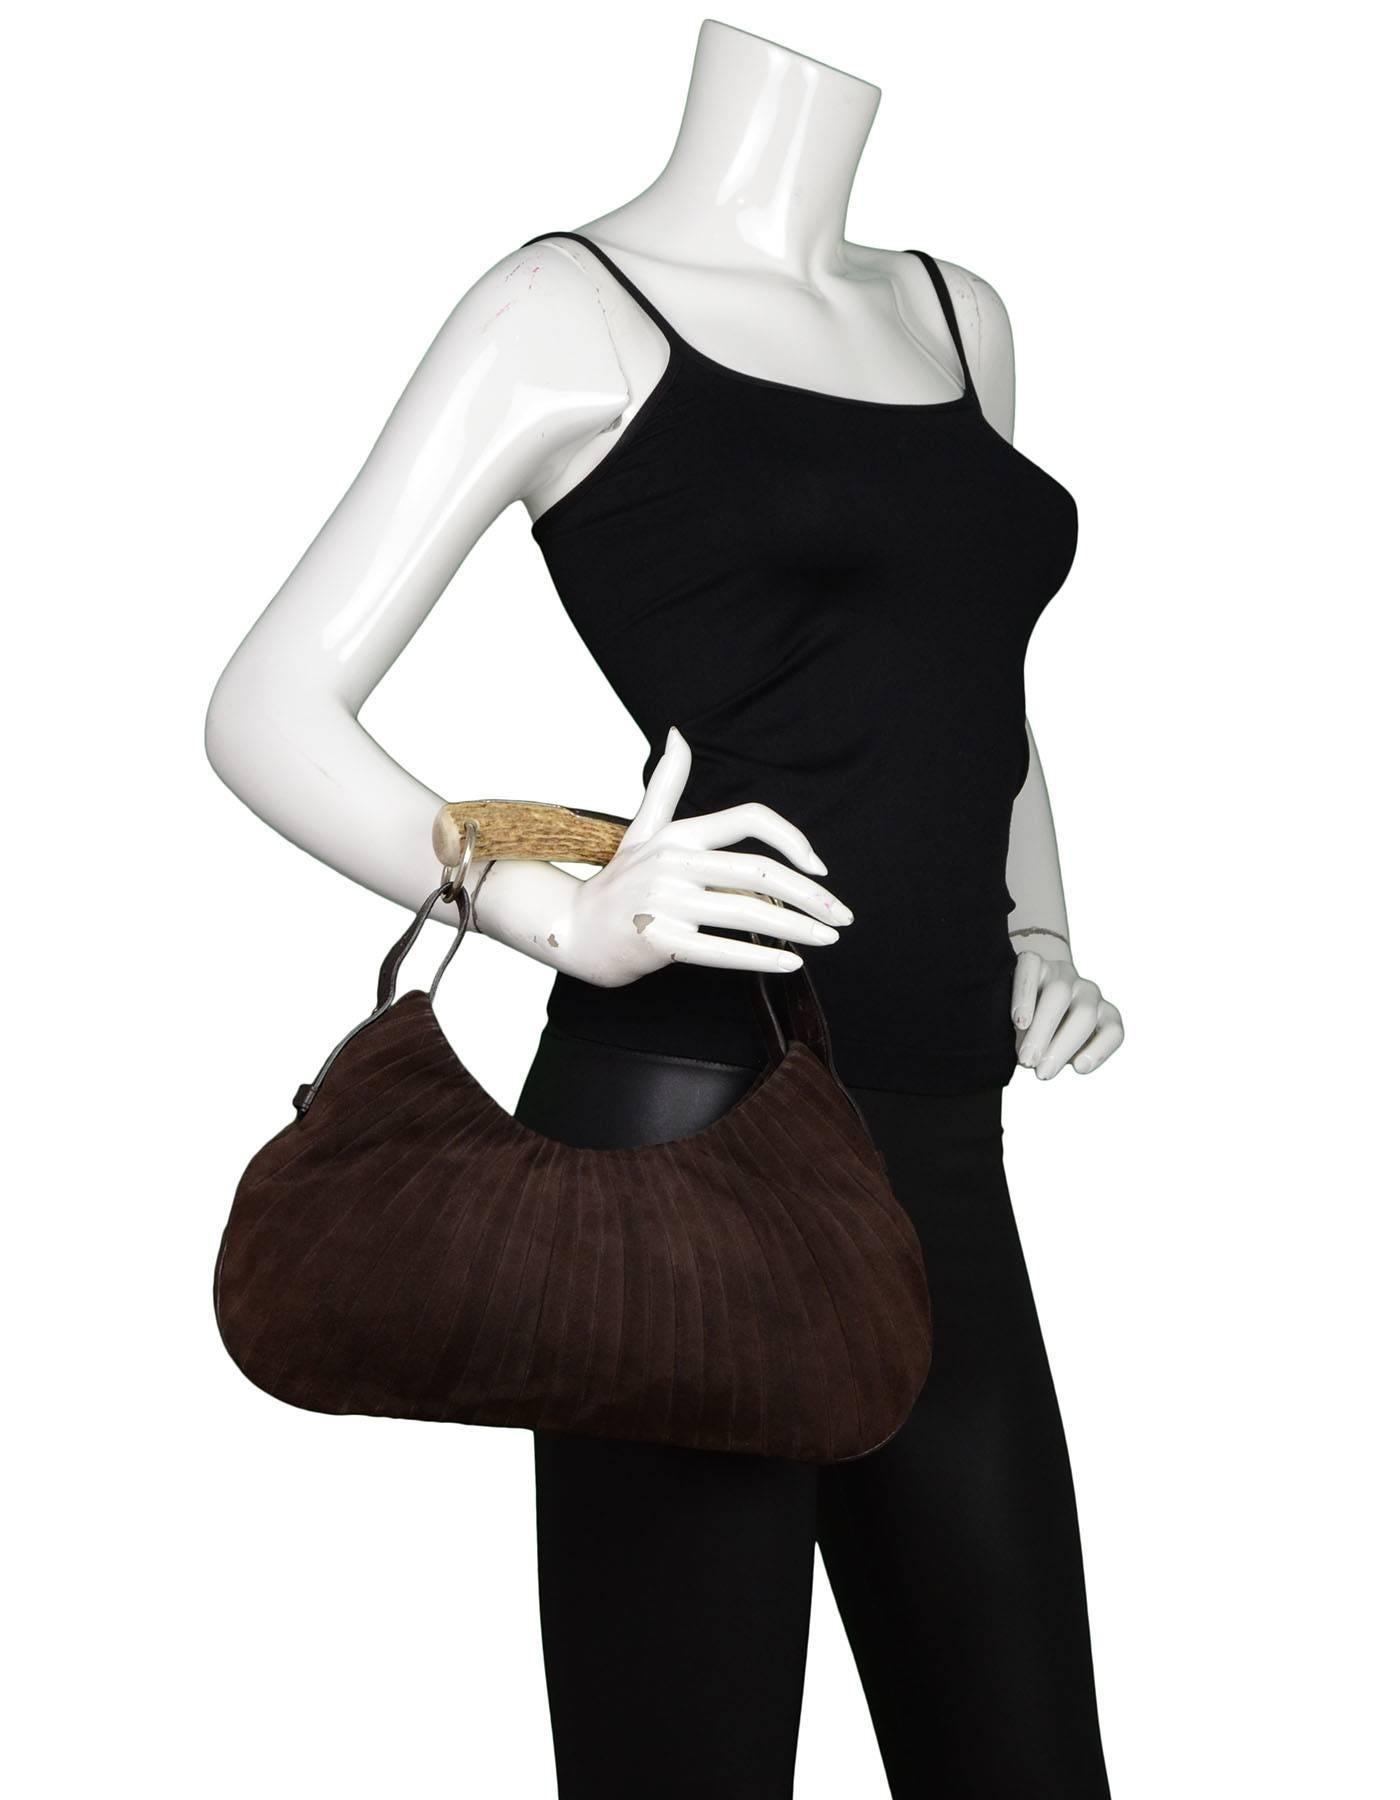 Yves Saint Laurent Brown Suede Mombasa Horn Bag

Made In: Italy
Color: Brown
Hardware: Silvertone
Materials: Suede
Lining: Brown textile
Closure/Opening: Center single snap closure
Interior Pockets: One zip wall pocket
Overall Condition: